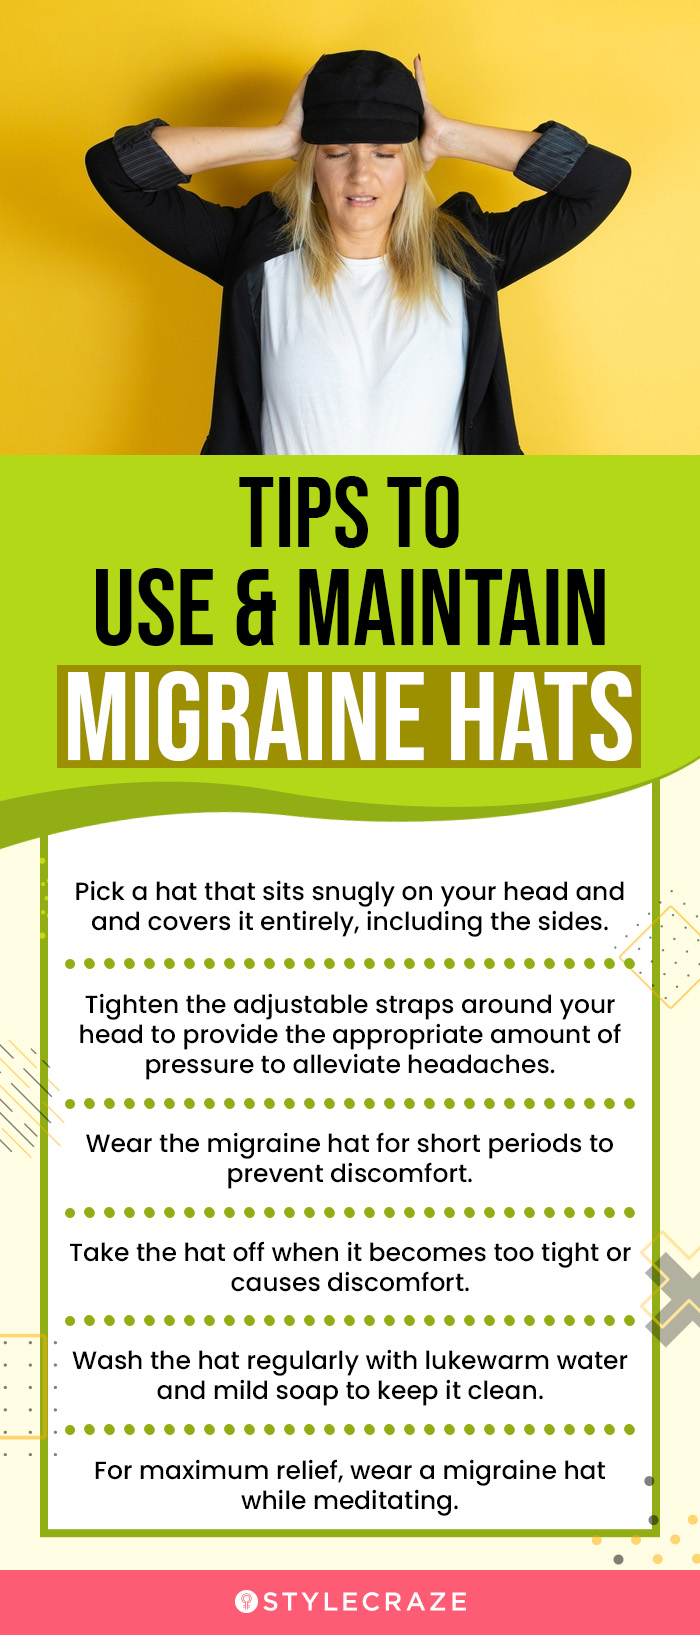 Tips To Use & Maintain Migraine Hats (infographic)